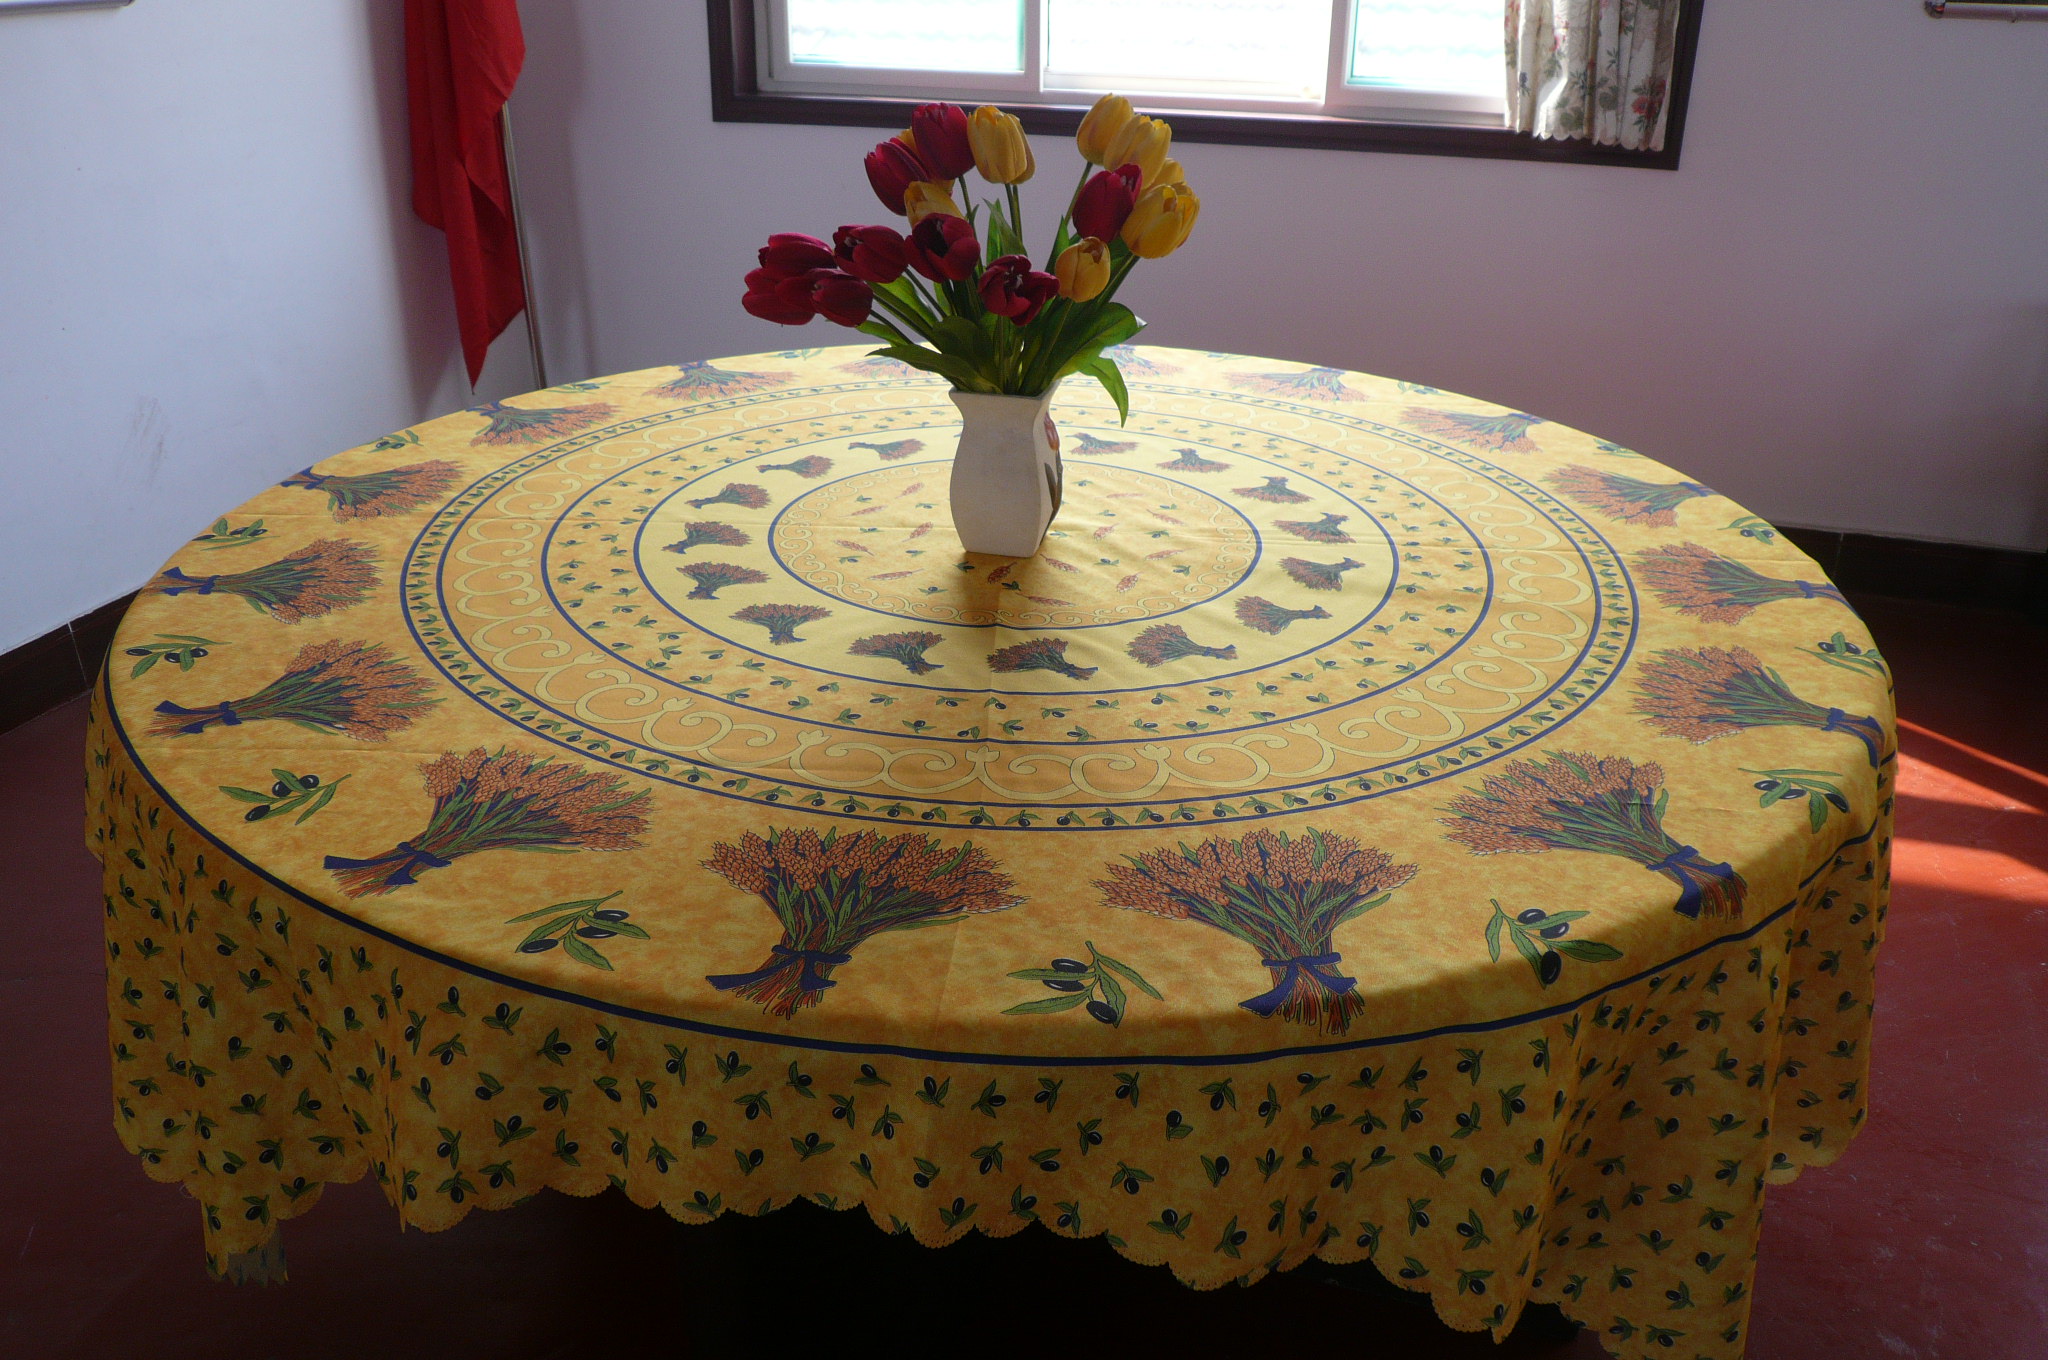 2017 Europe yellow harvest corns printed polyester table cloth table linen